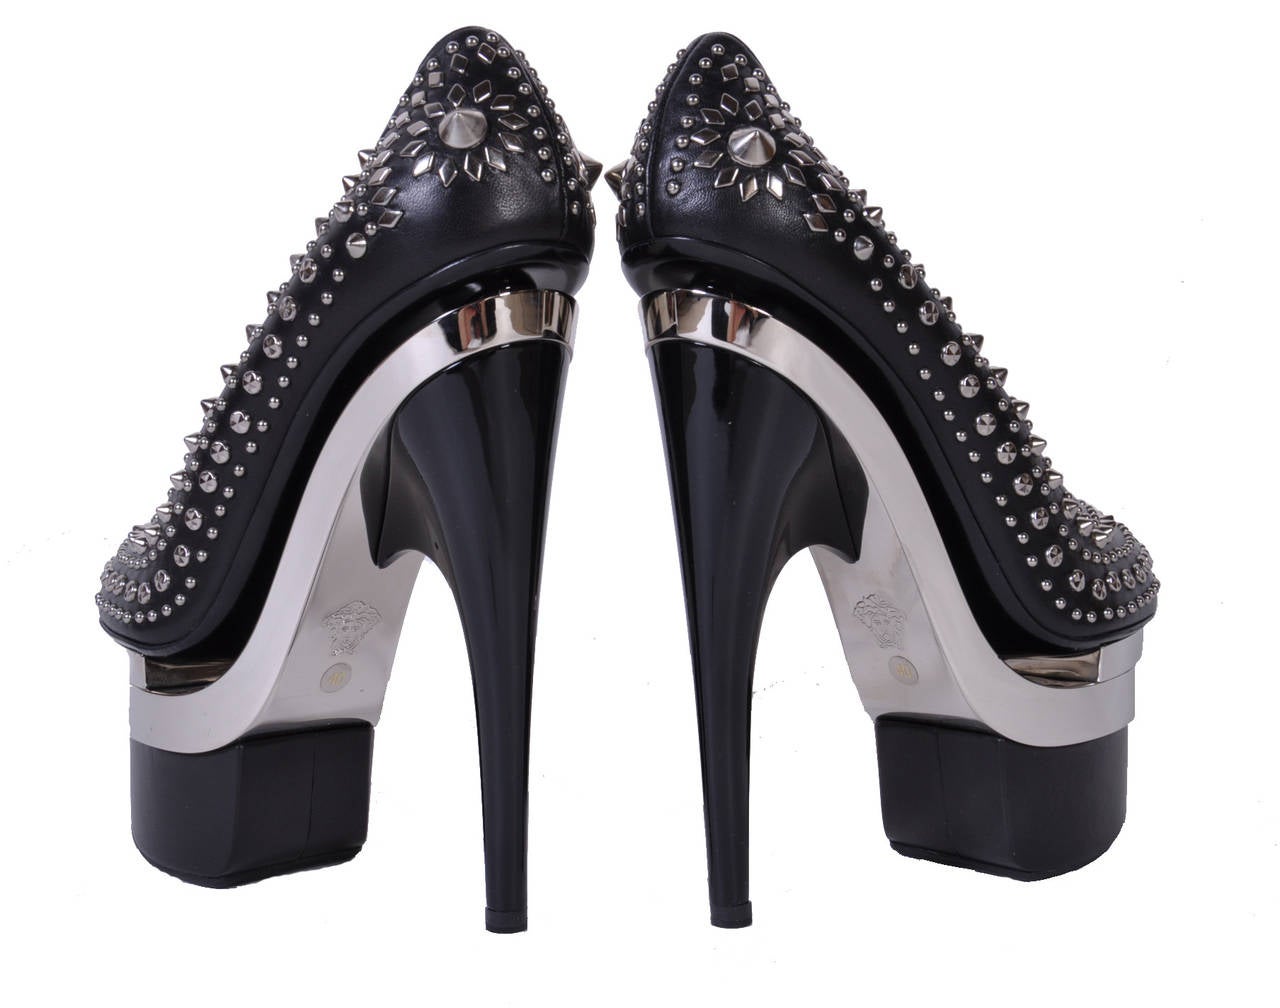 BRAND NEW

VERSACE PLATFORMS

Silver studded pumps with triple the drama. 

These Versace triple platform shoes add sparkle and studs to your night out.

100% leather

Heel measures 6 in. Platform measures 4 in.

Made in Italy

Sizes 36.5 and 41

